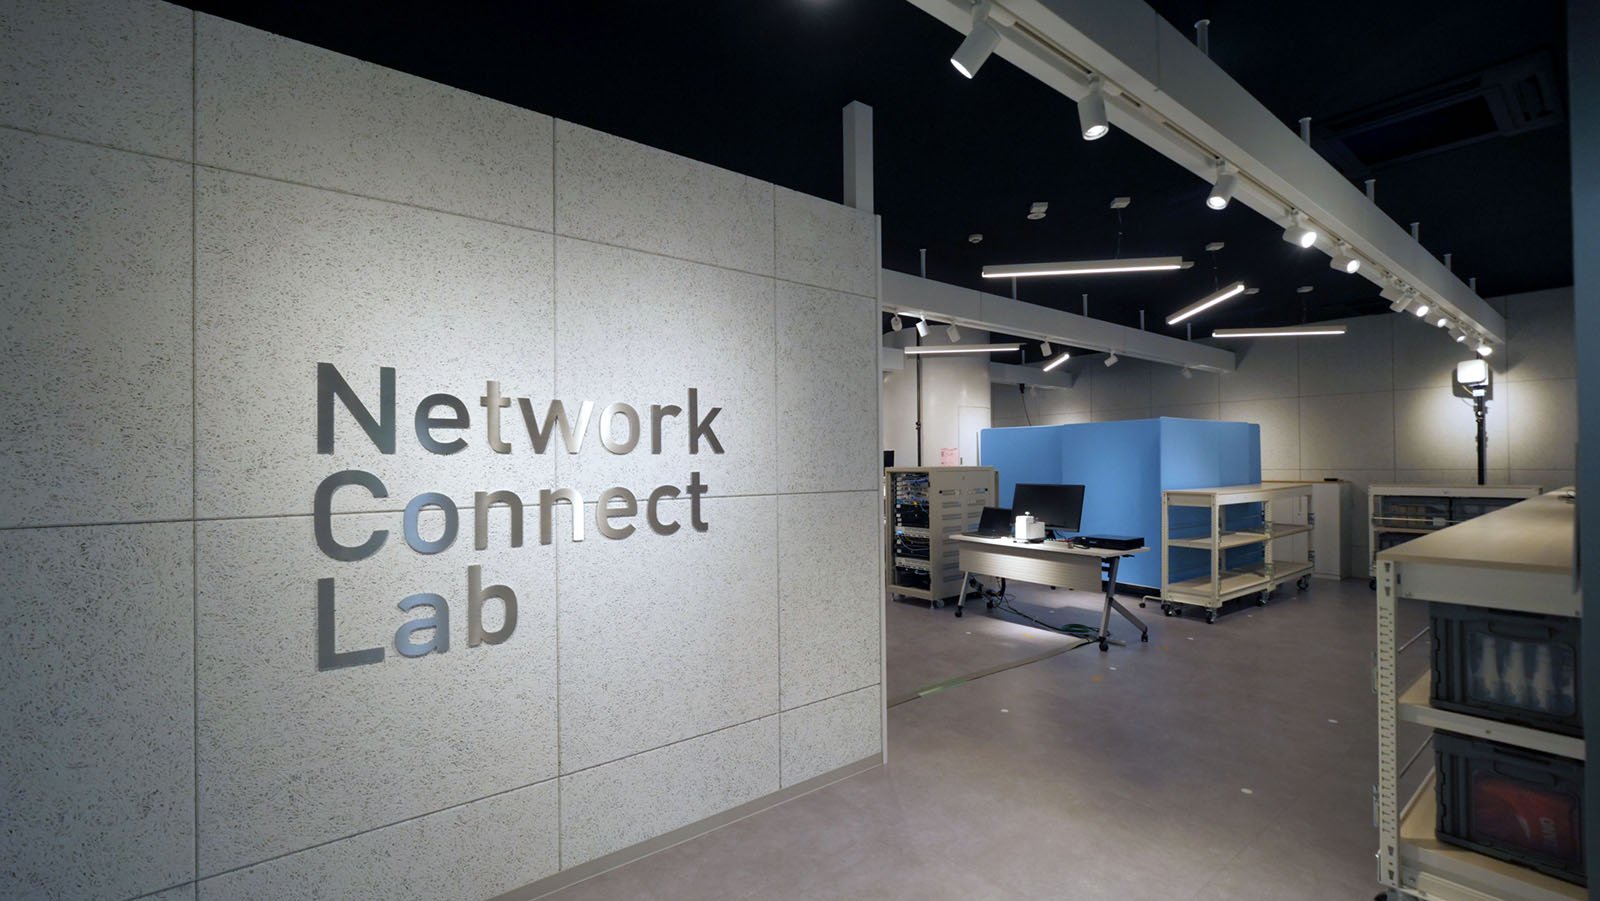 Network Connect Lab